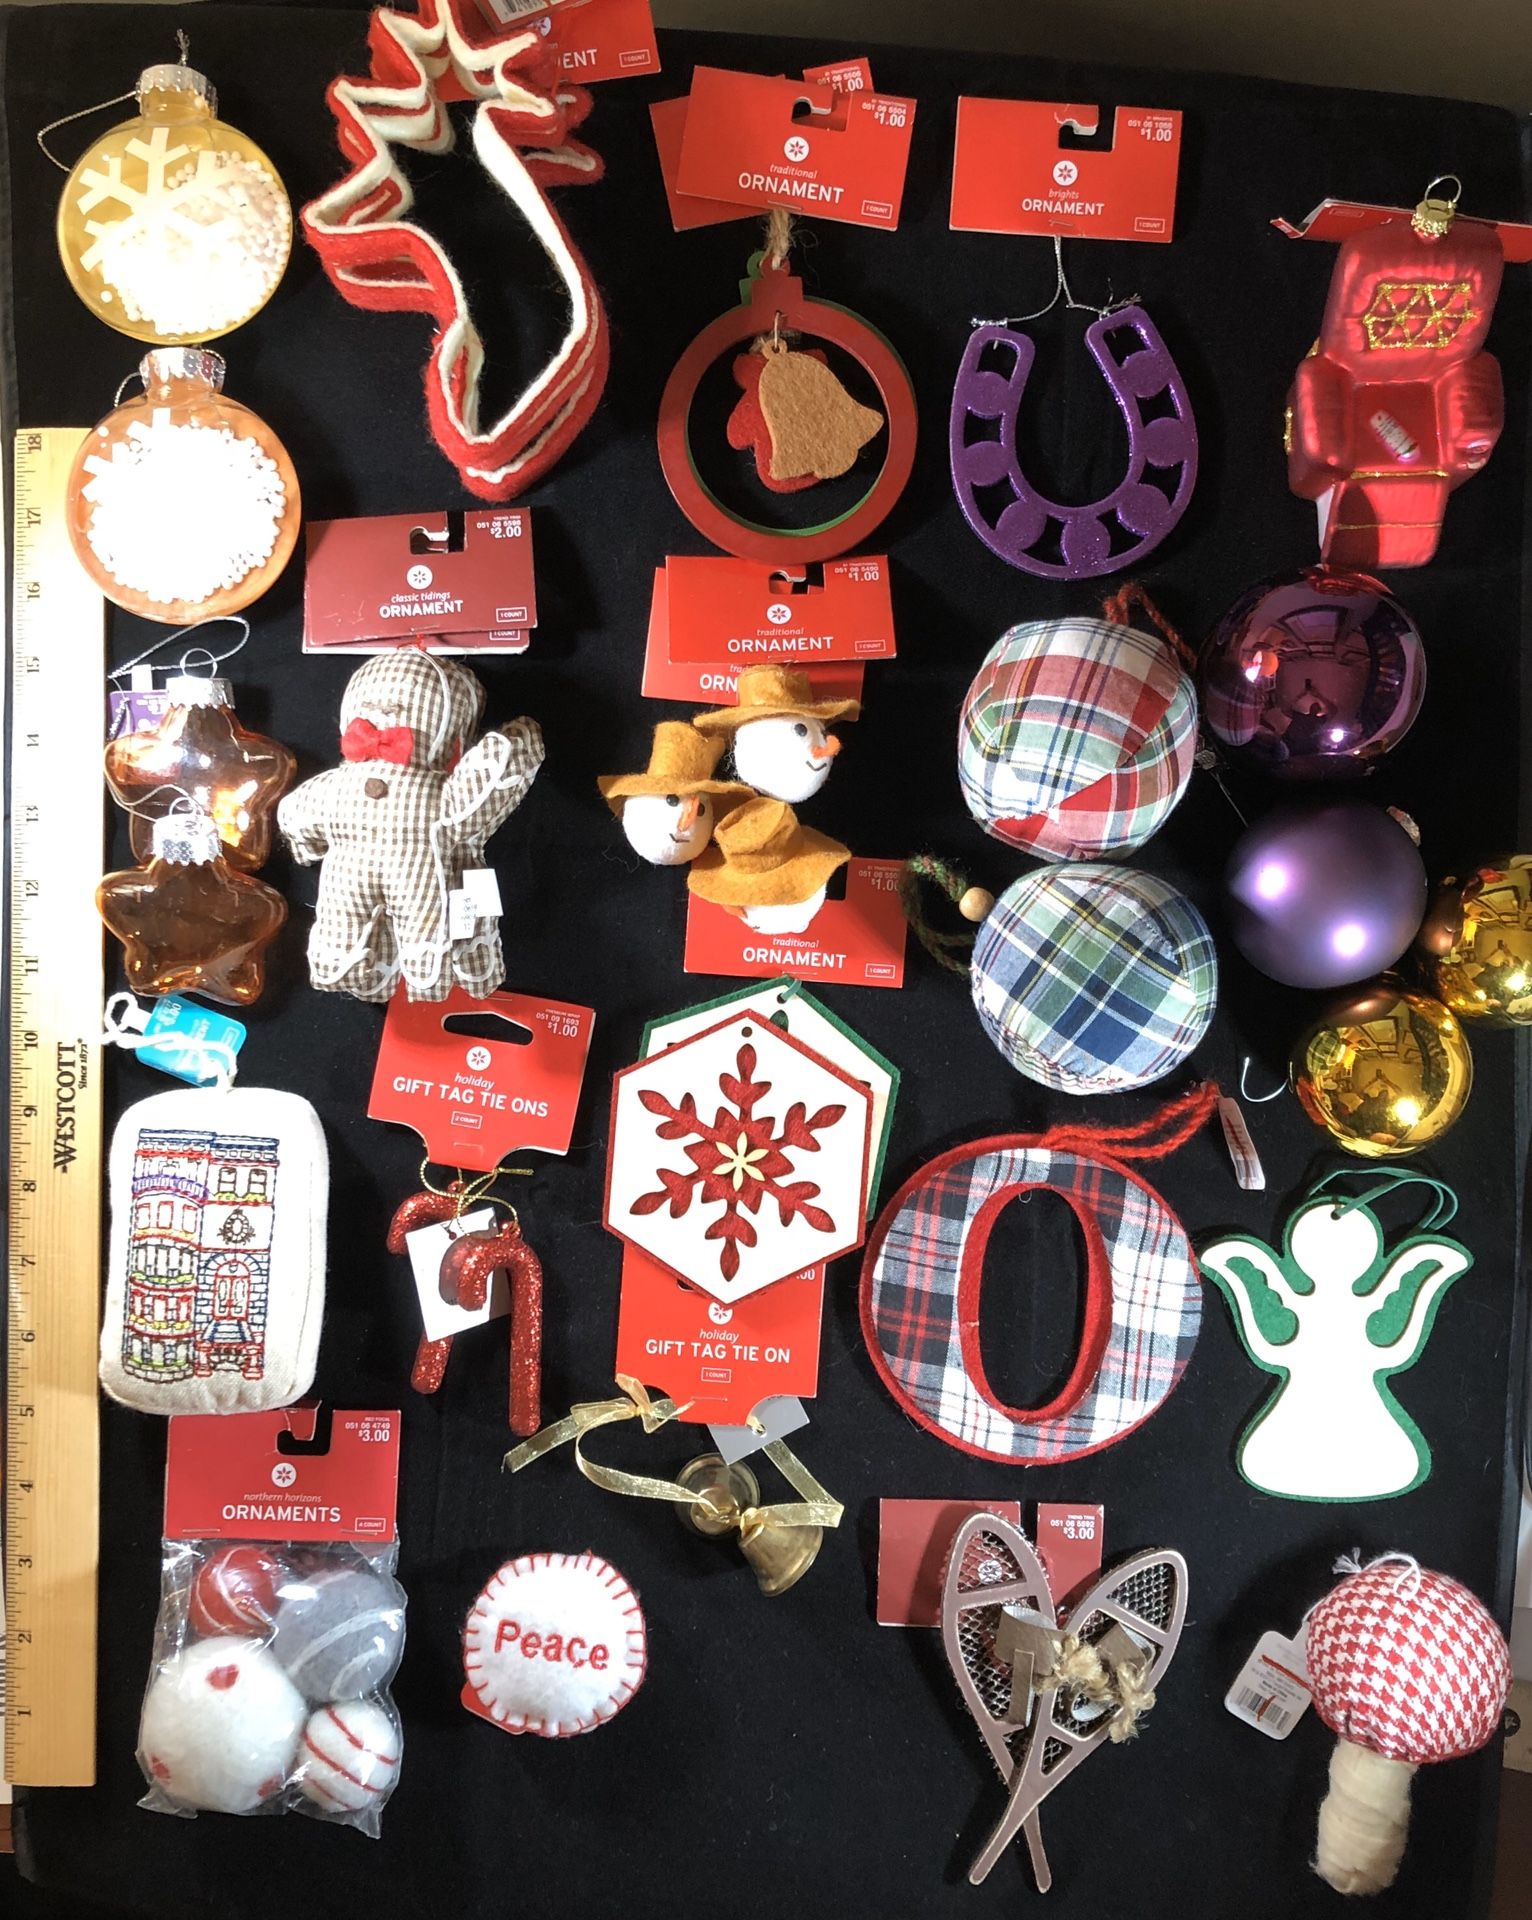 An assortment of Ornaments, Gift Tag Tie Ons, and more.